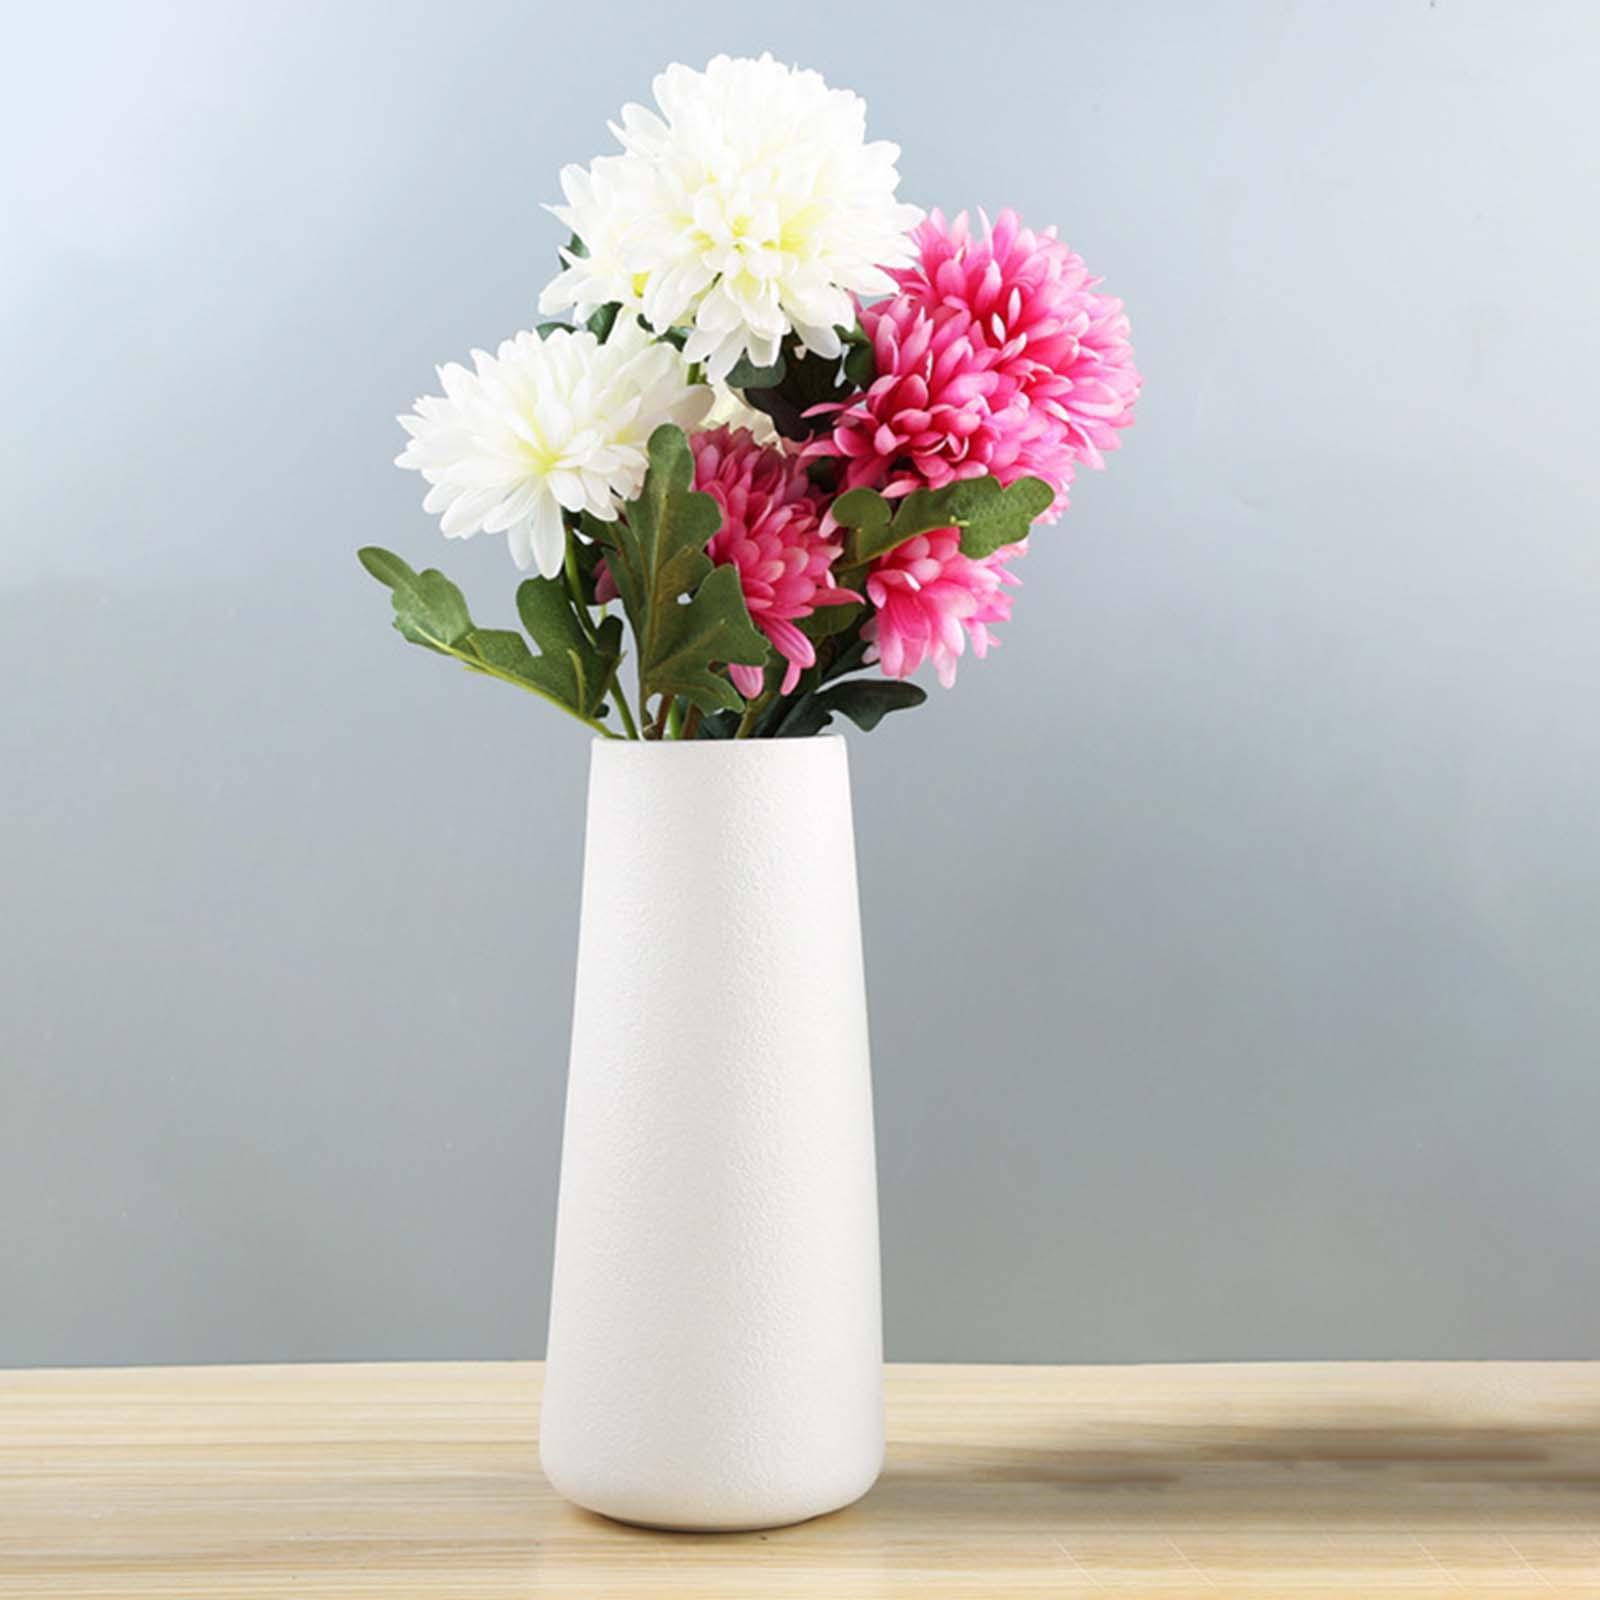 Nordic Style Decorative Vase,Dried Flower Container ,Nordic Minimalism Style Decoration for Cabinet Living Room